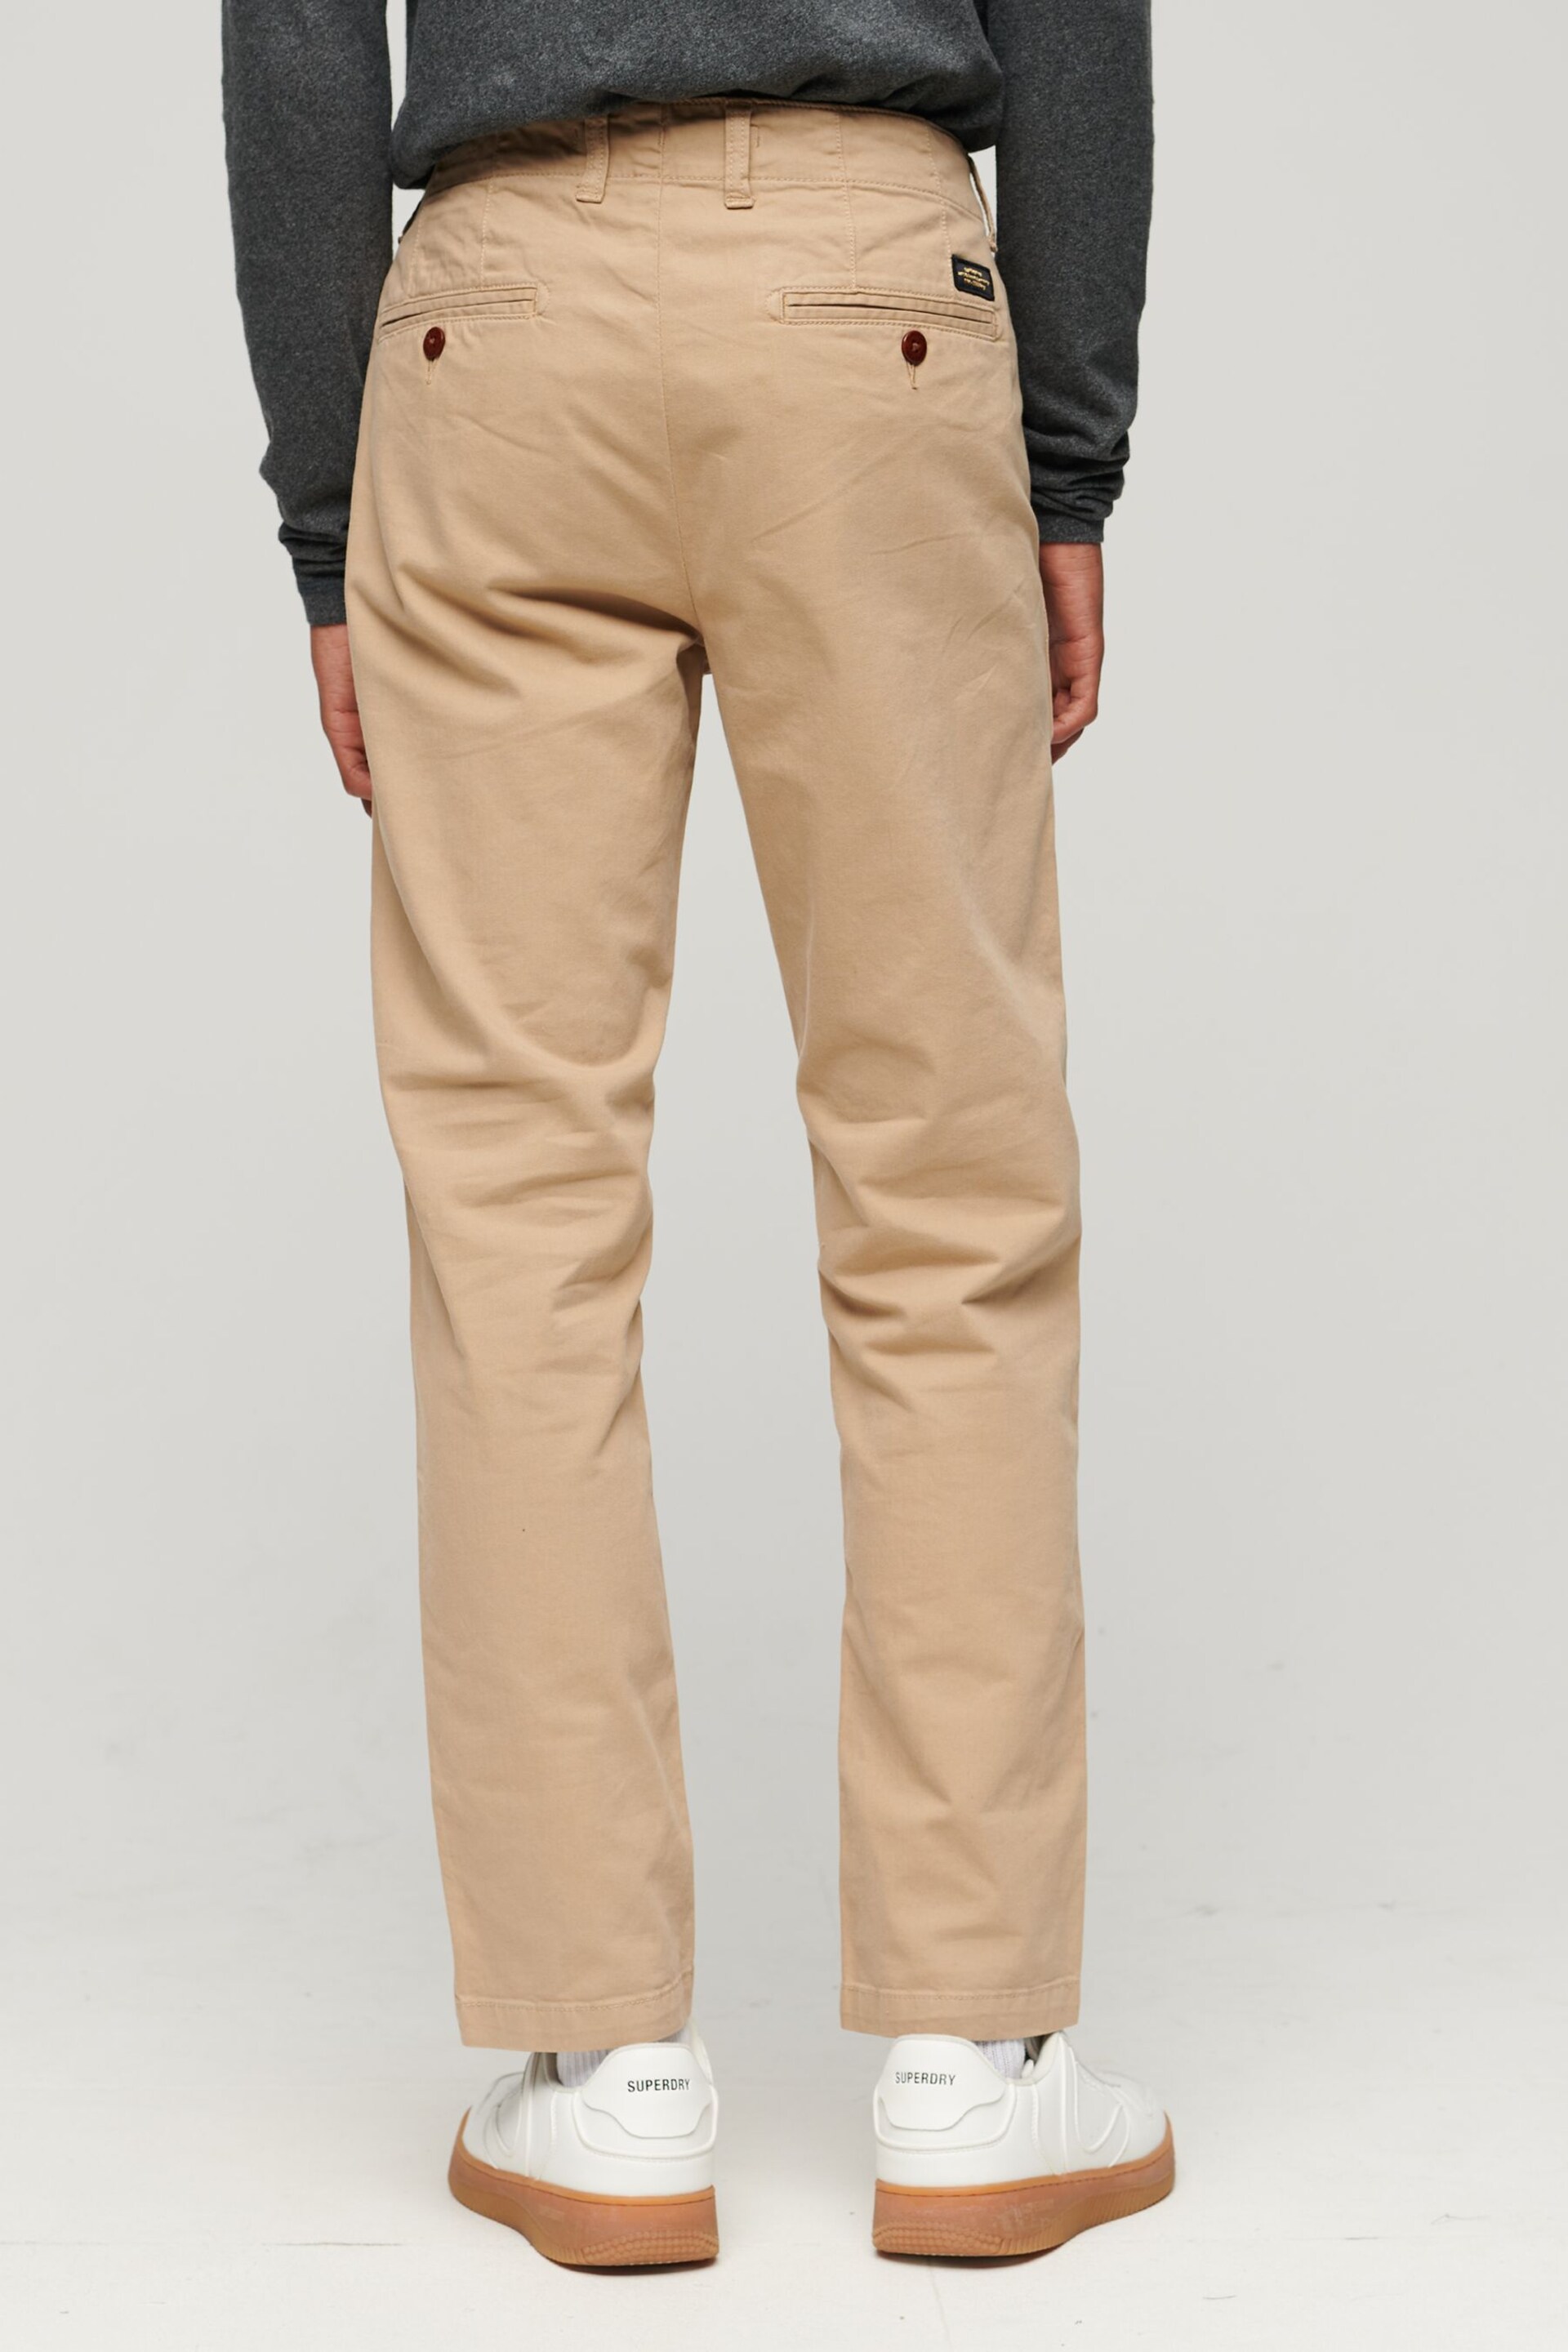 Superdry Brown Slim Officers Chinos Trousers - Image 2 of 7